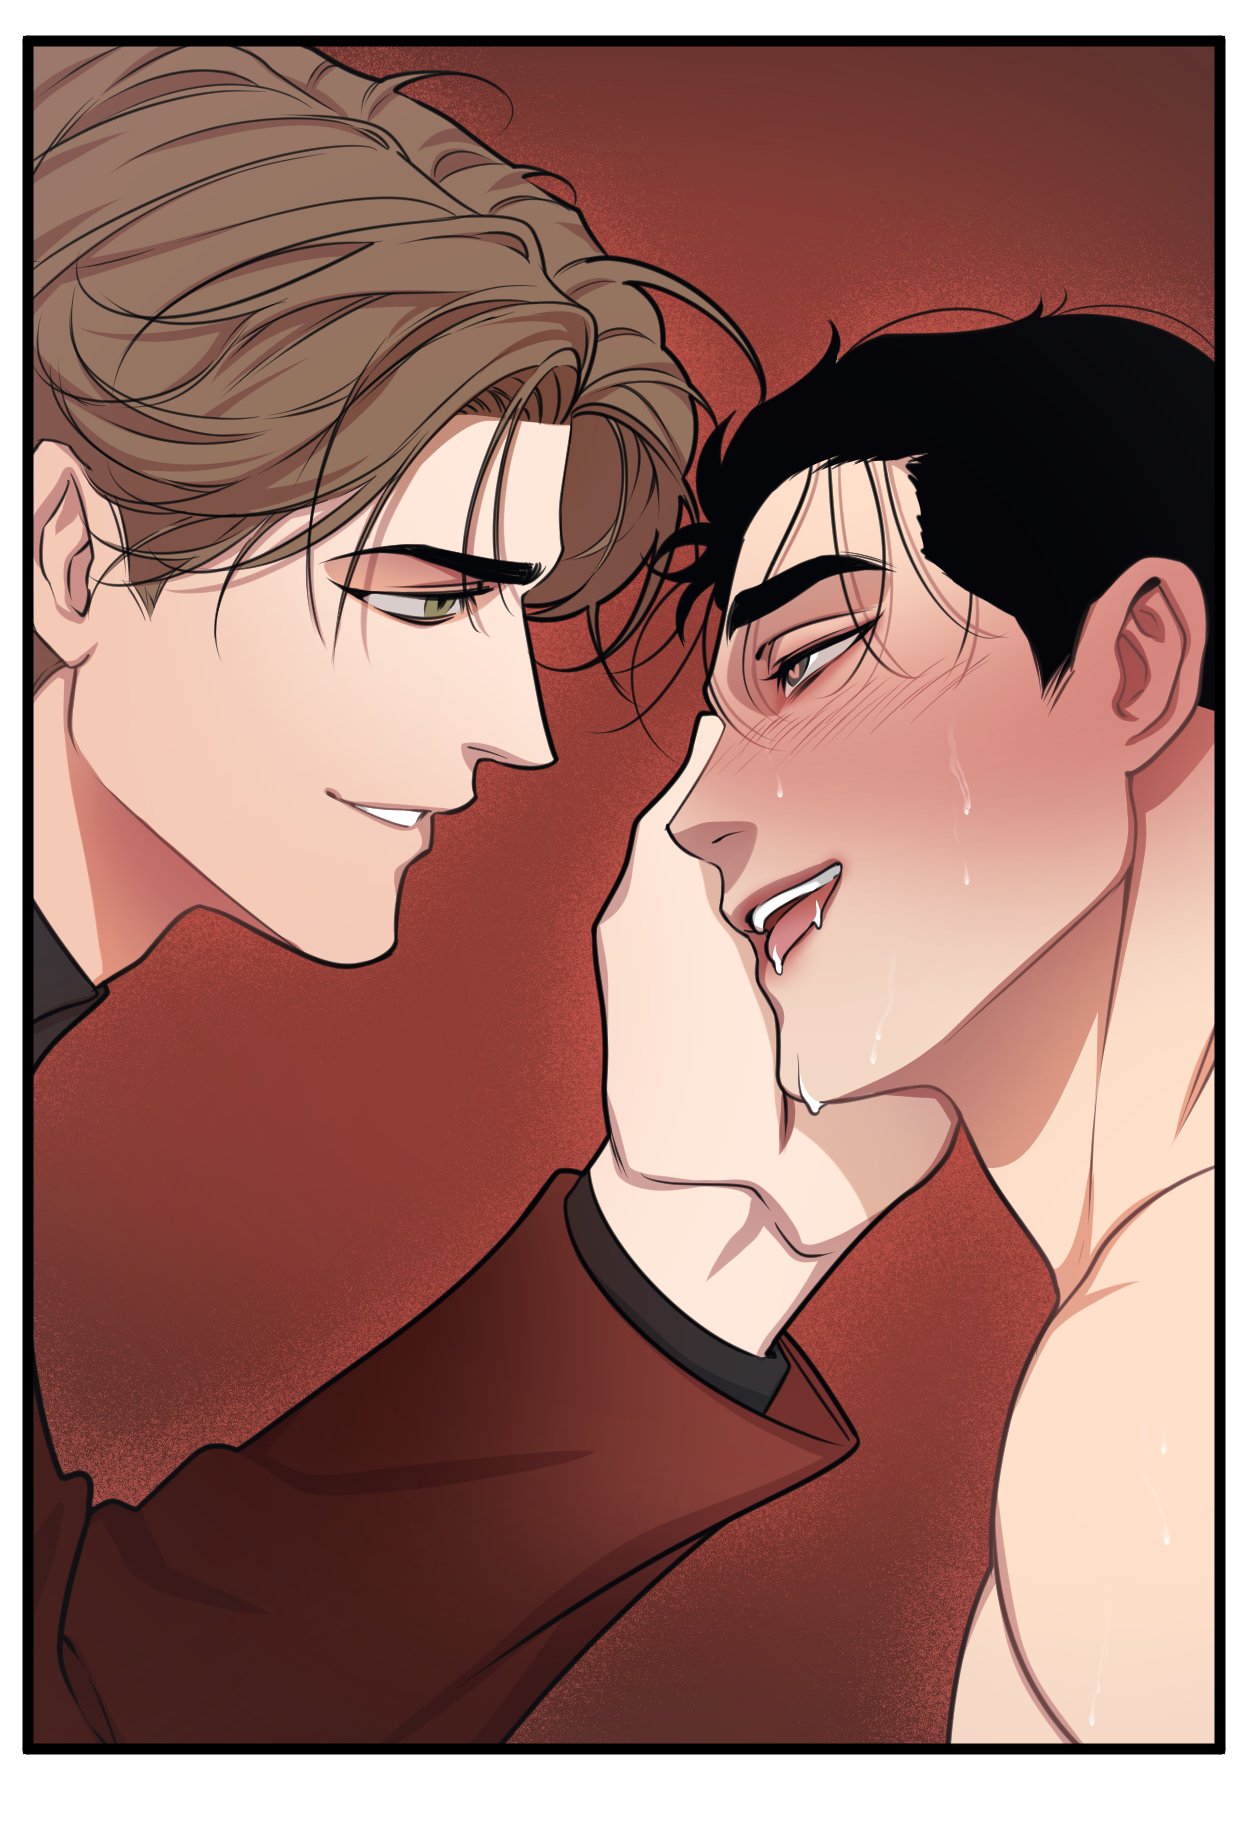 full-volume With This BL Manhwa, You Can Enjoy a Sexy Cam Show at Full Volume